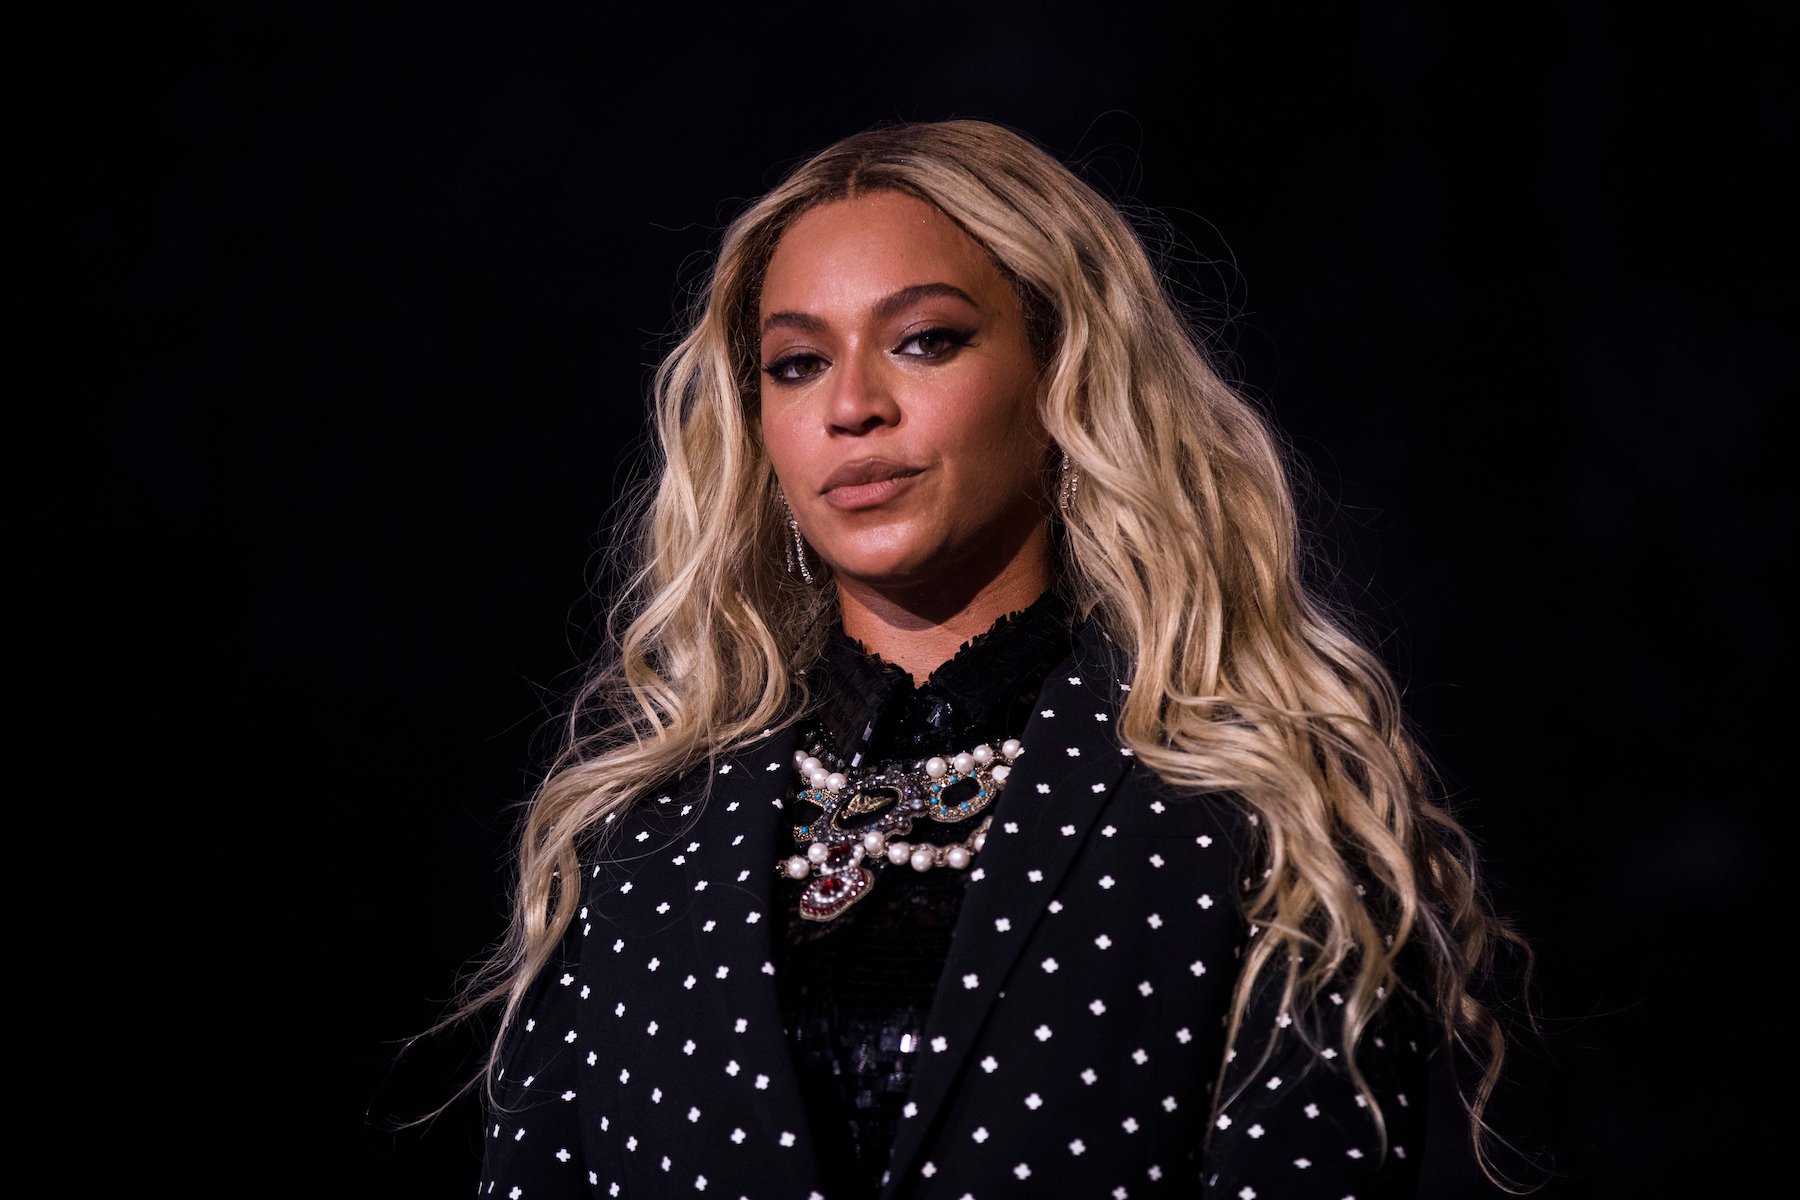 Beyoncé Once Revealed 1 ‘Embarrassing’ Ritual — Buying 20 of Her Own Albums